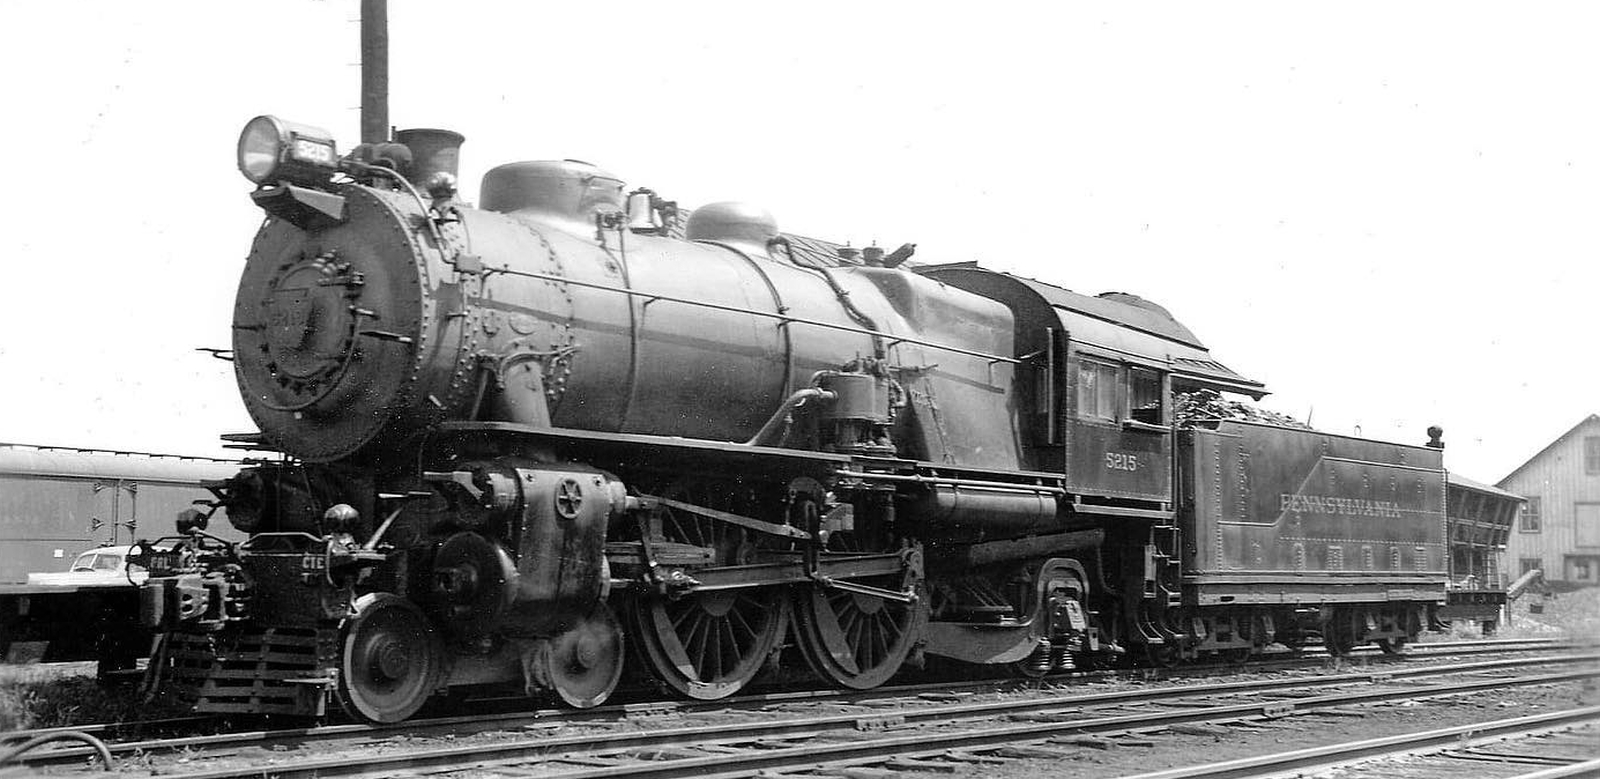 E6s No. 5215 in August 1941 at Pemberton, New Jersey